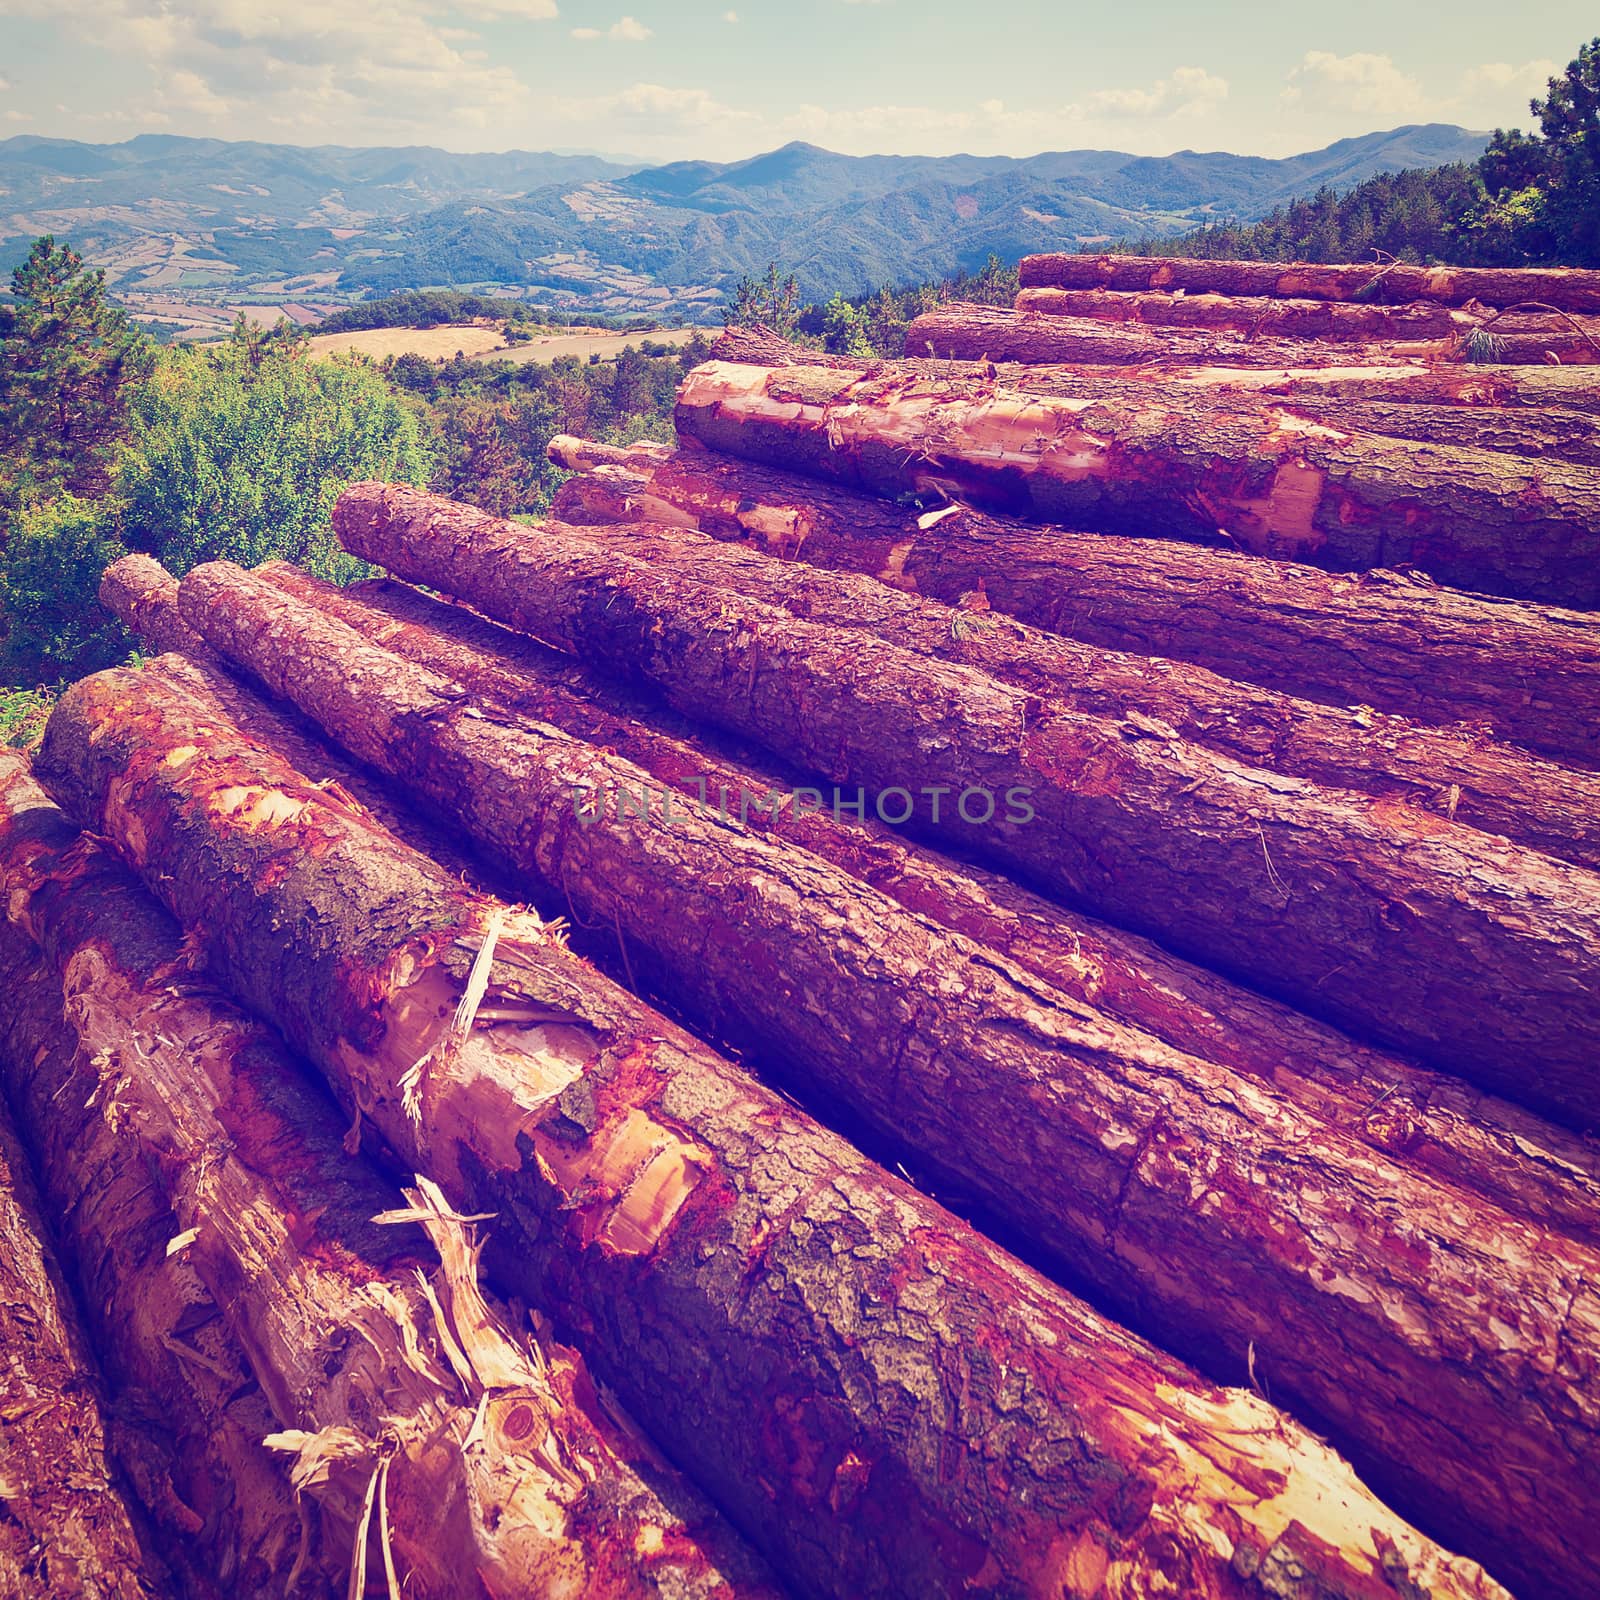 Sawed Firewood Dropped in a Pile on the Background of the Italian Alps, Instagram Effect